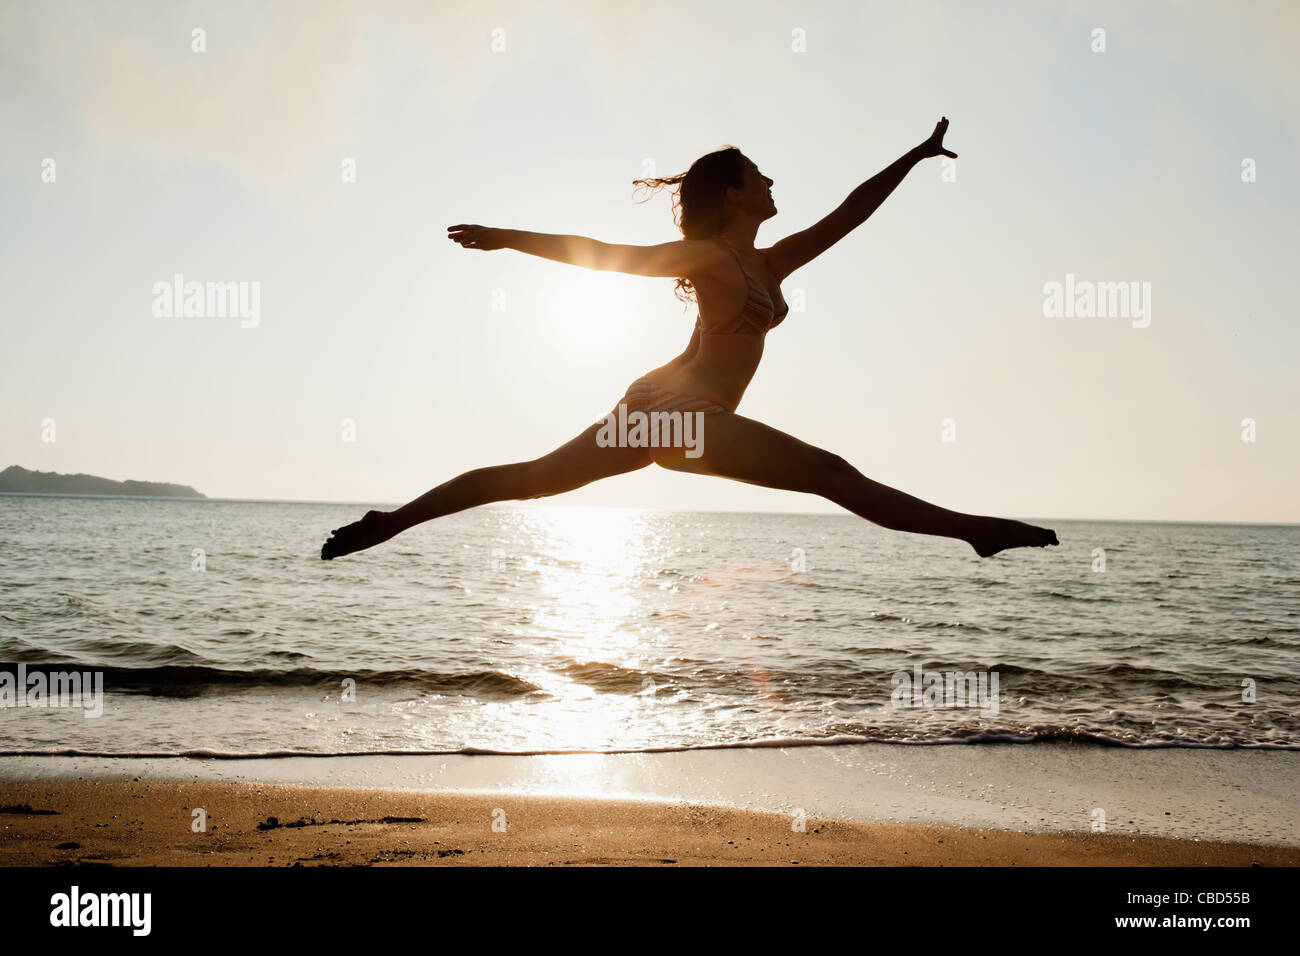 Woman leaping over waves on beach Stock Photo